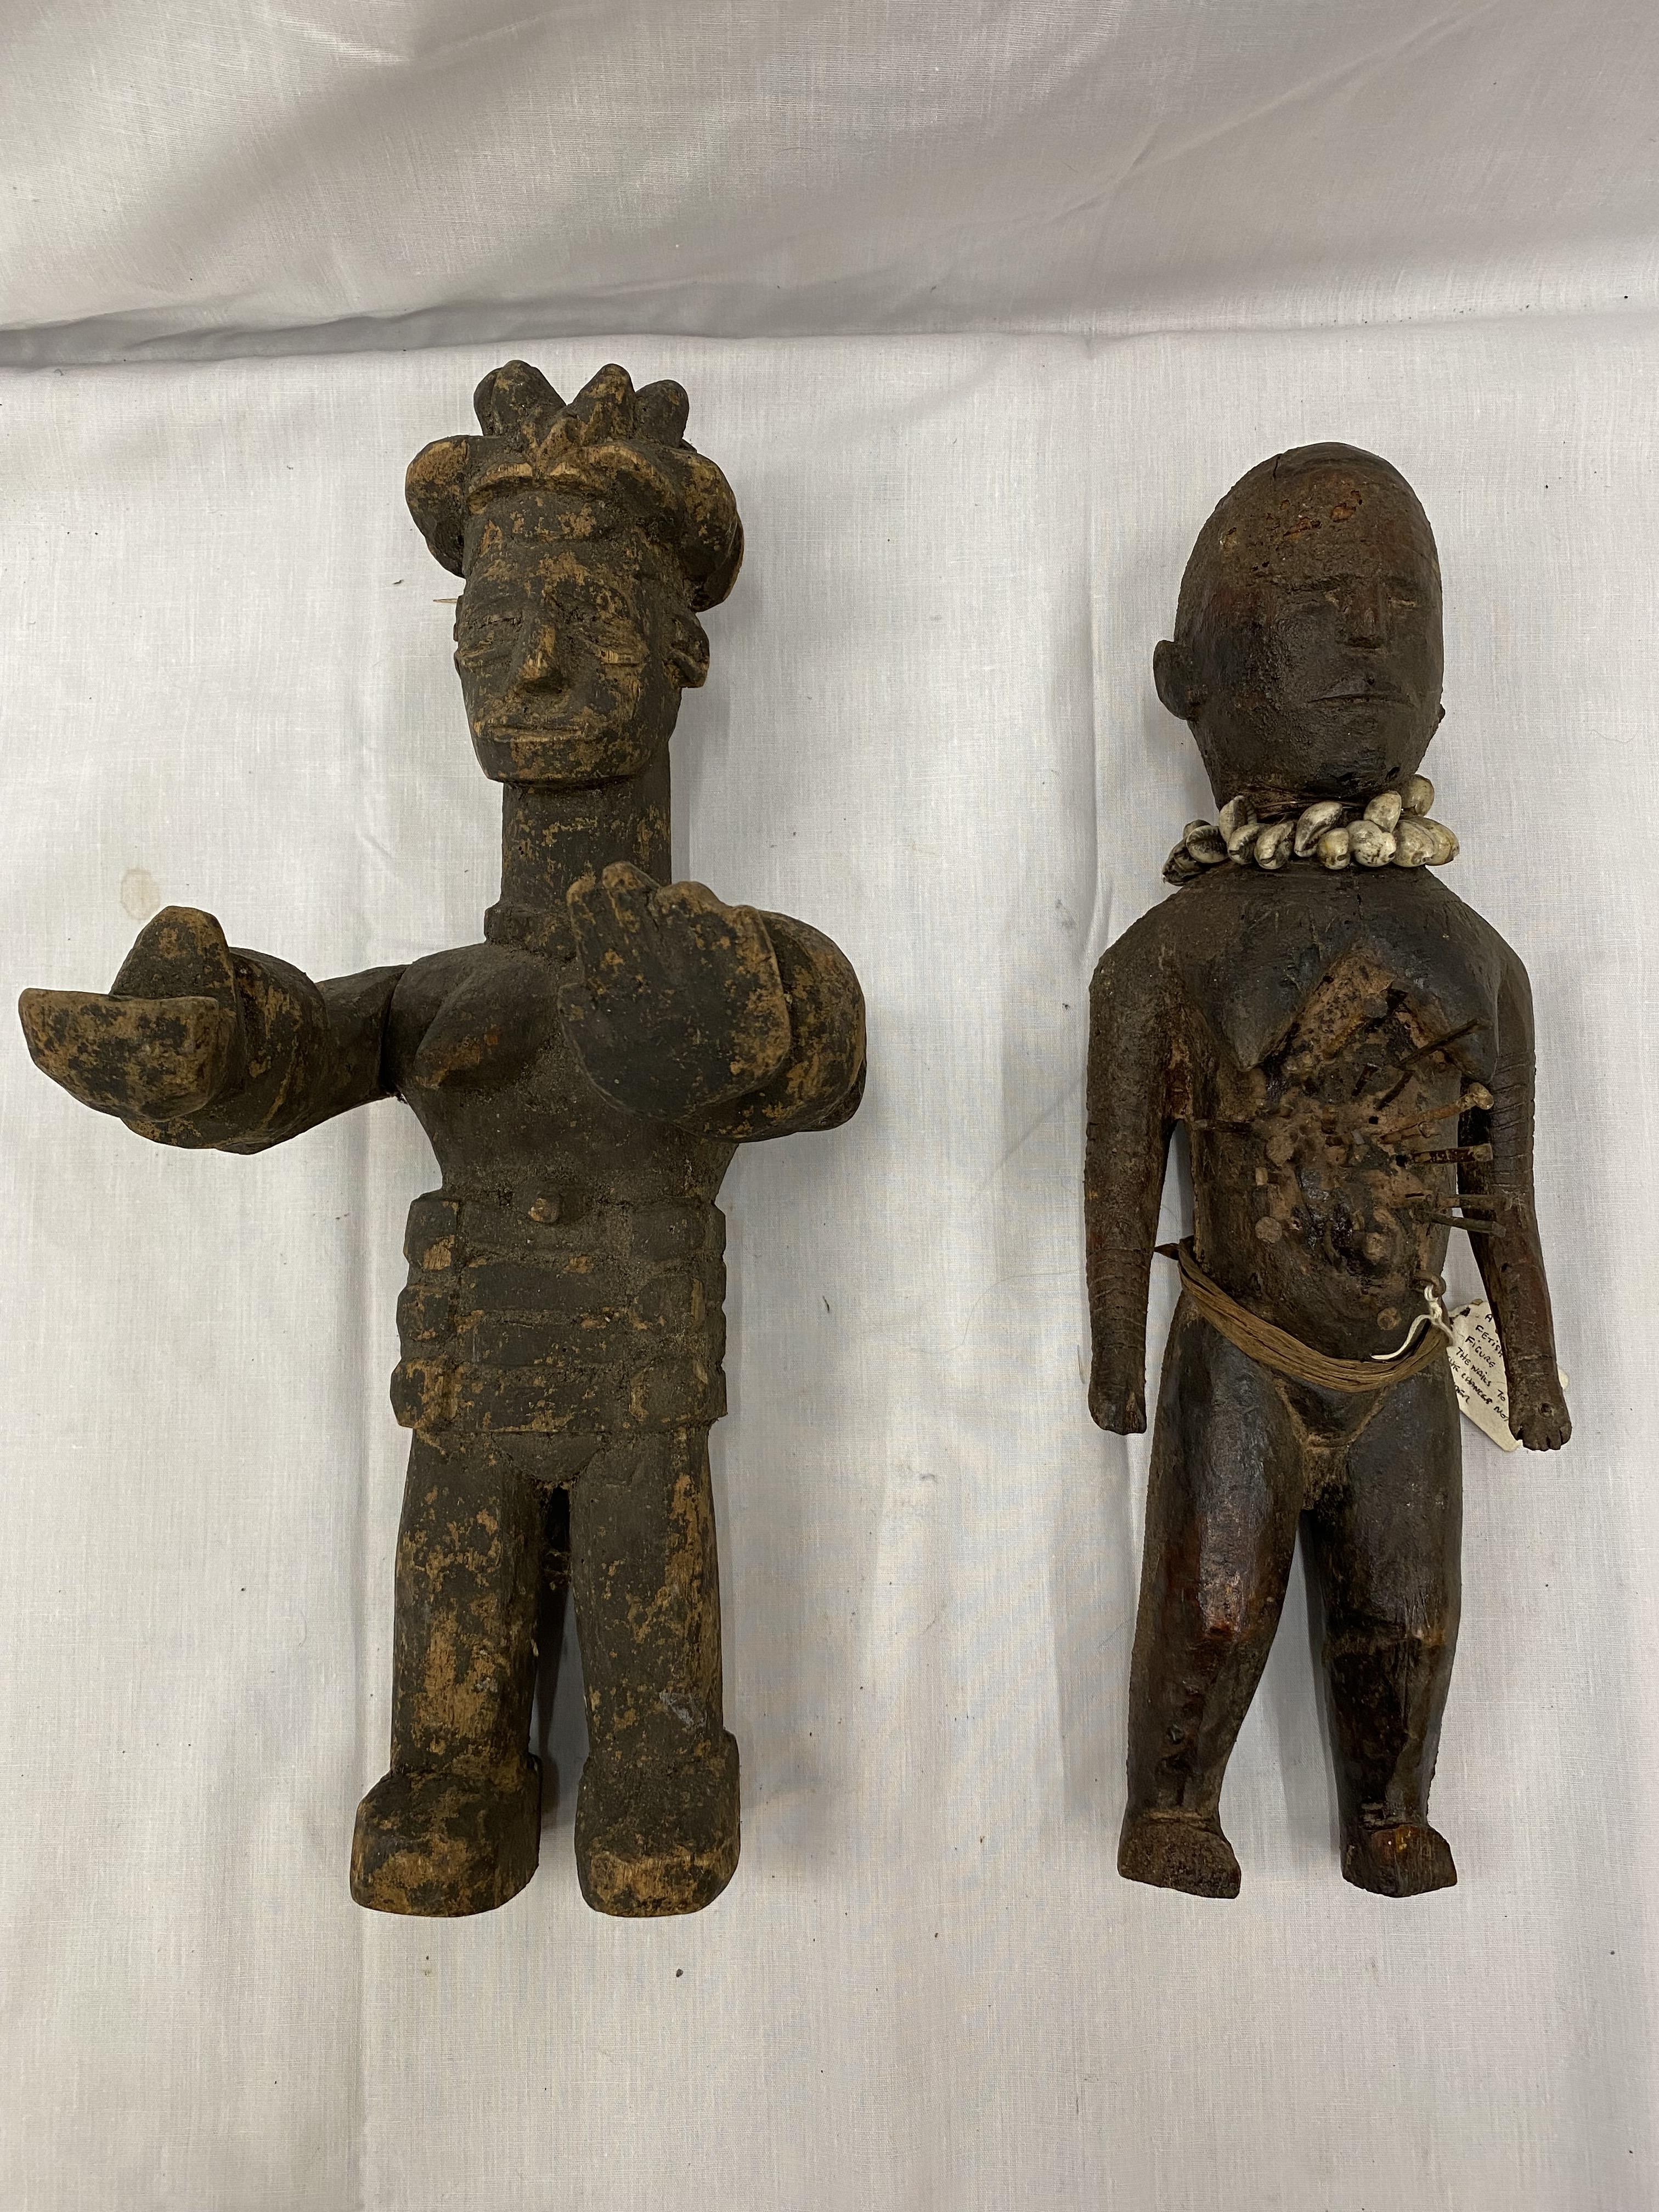 TWO HAND CARVED AFRICAN TRIBAL FIGURES, ONE BEING A FEMALE FERTILITY FIGURE. THE NAILS ARE TO